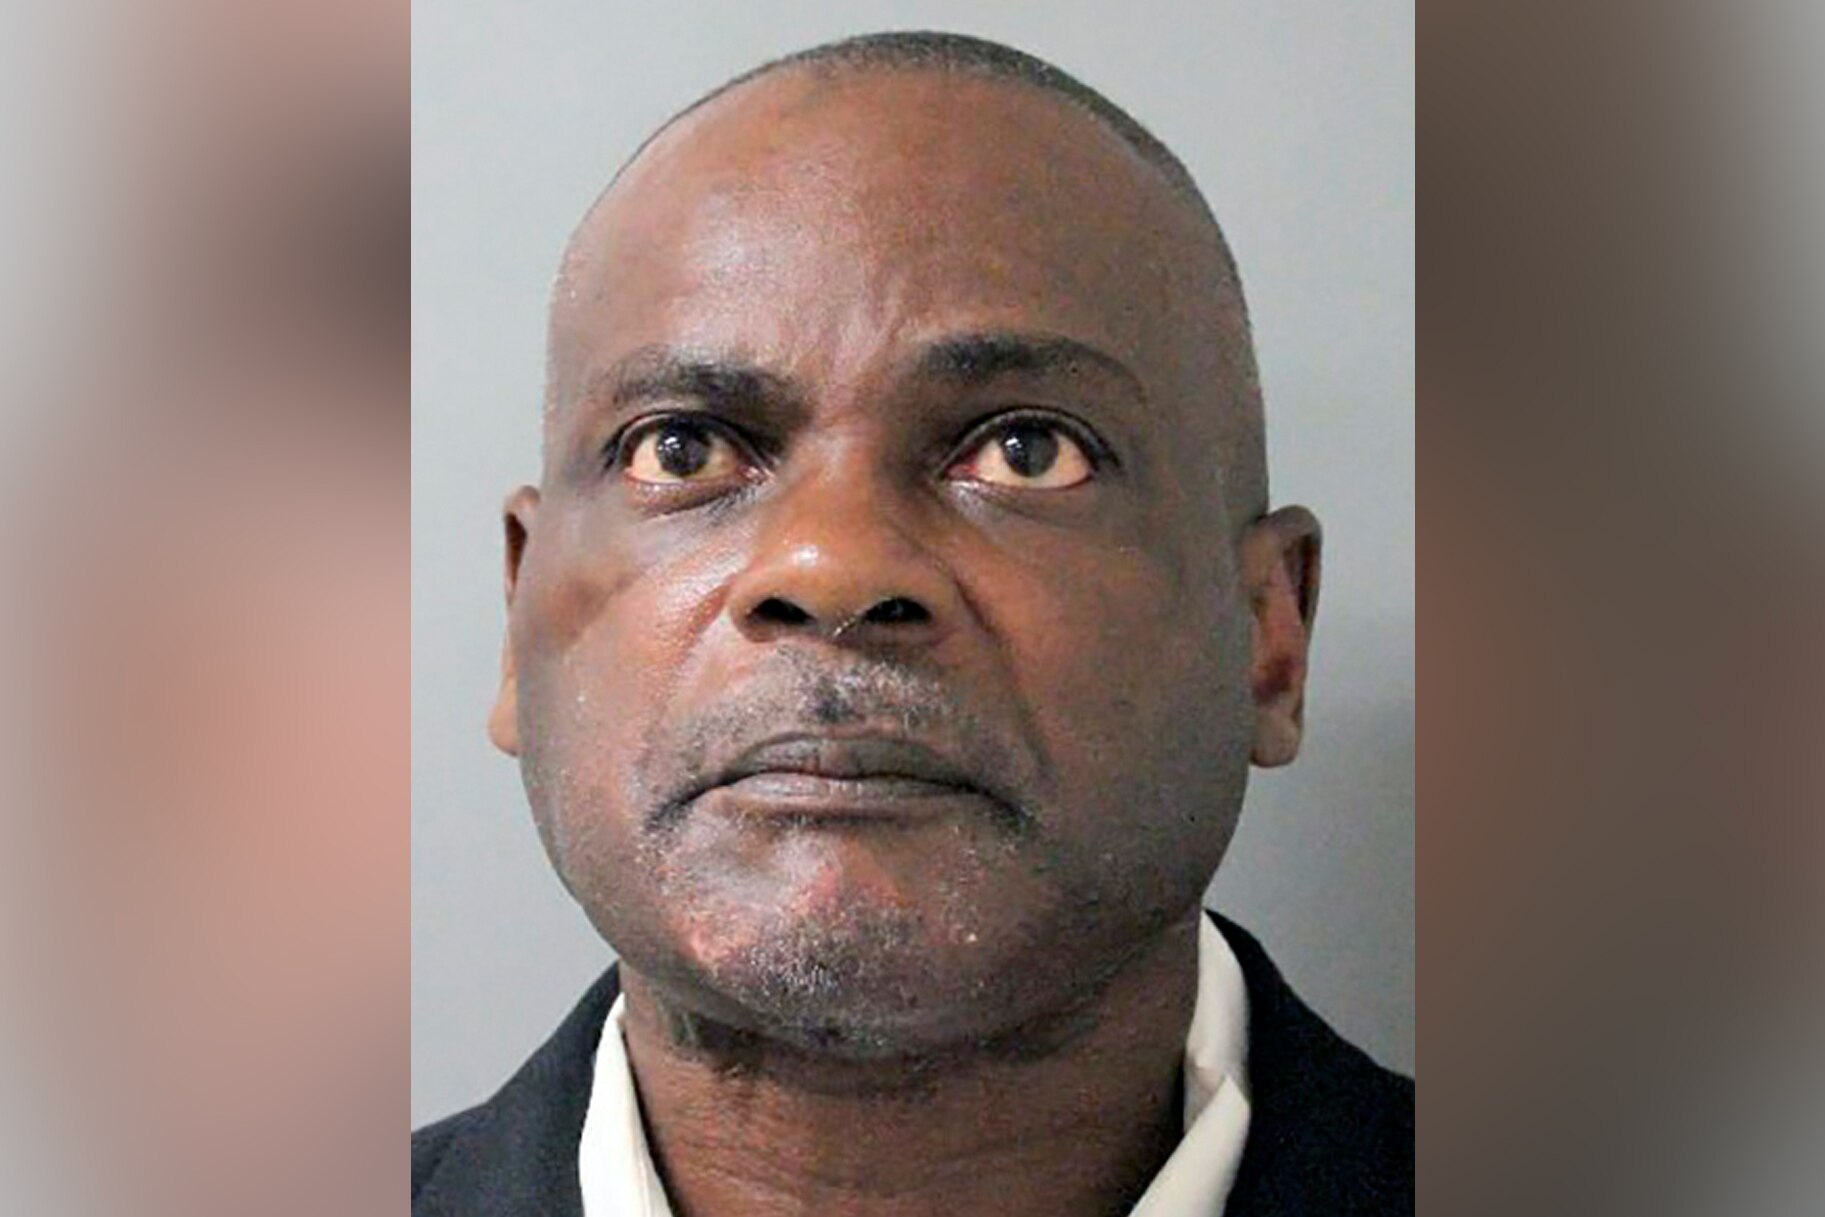 Gerald Goines, a former Houston police officer who has been charged with murder